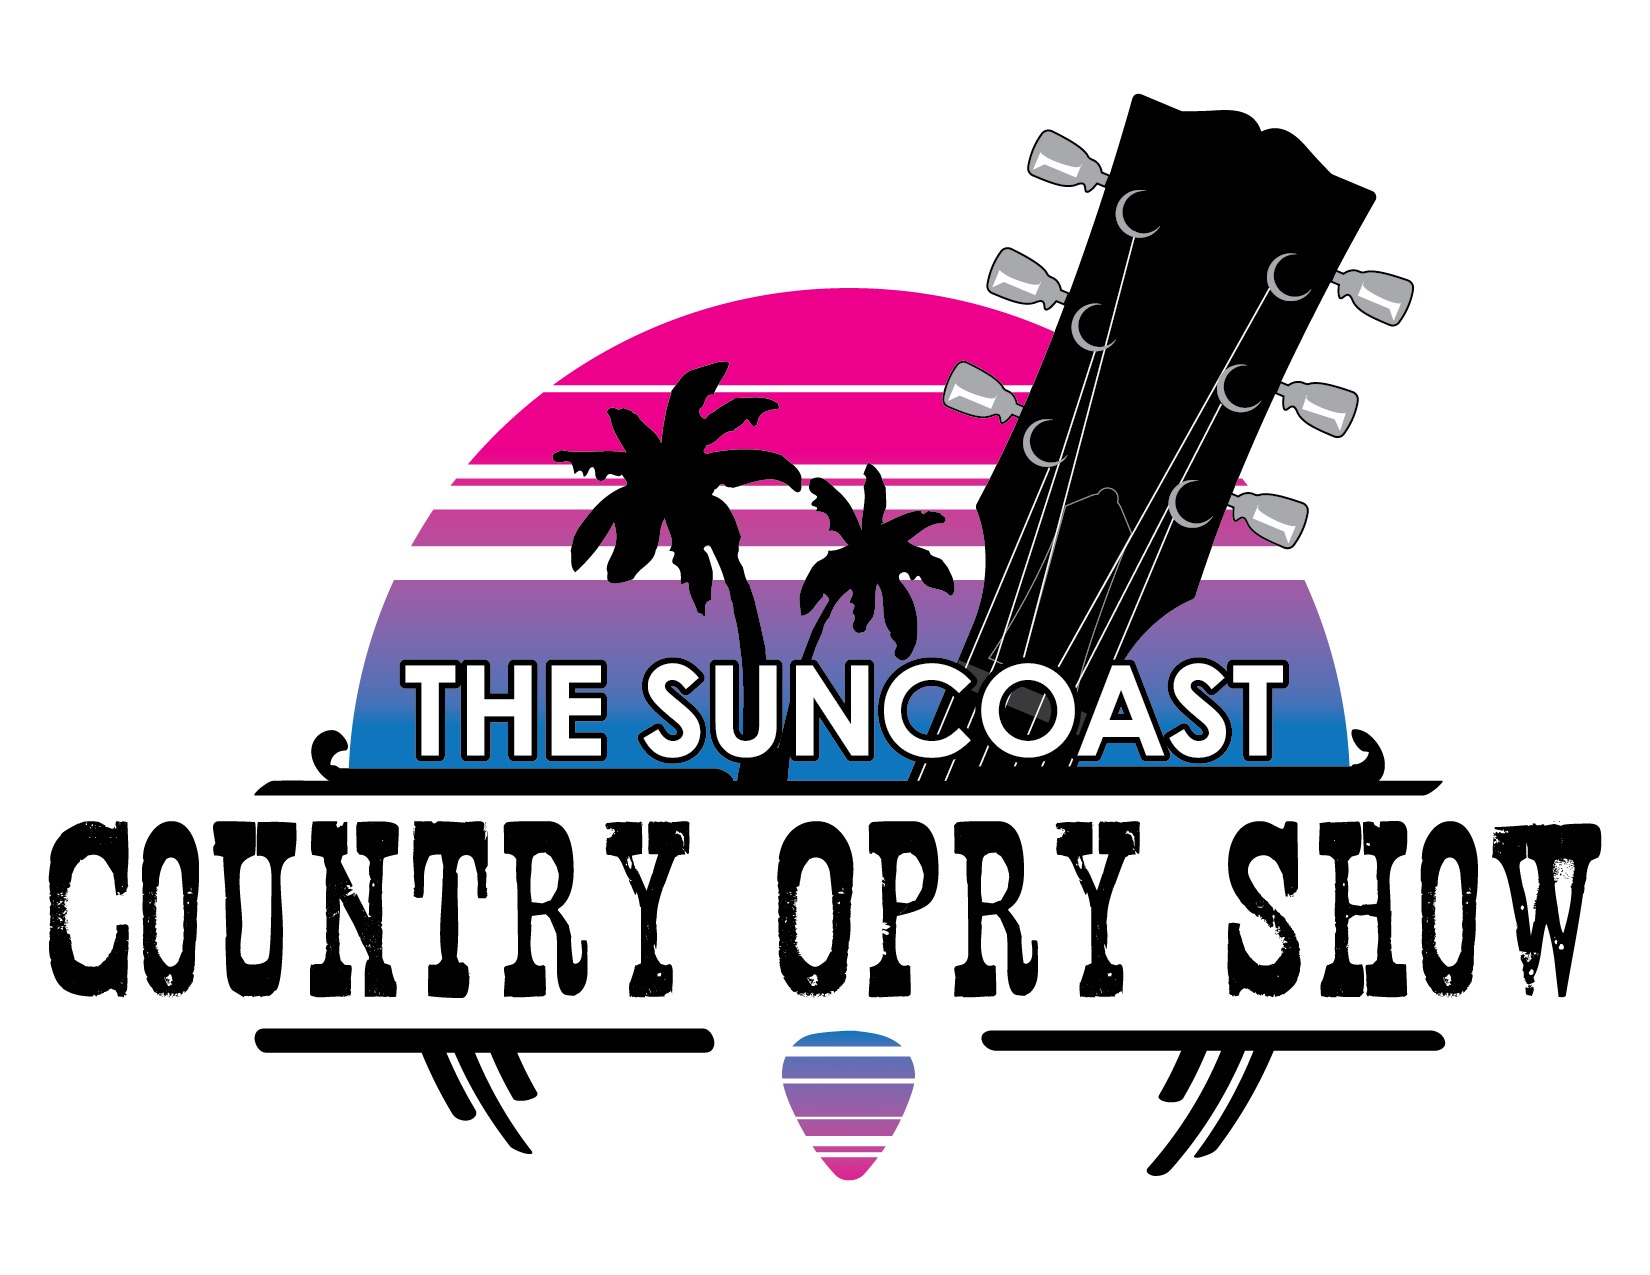 Suncoast Country Opry Show